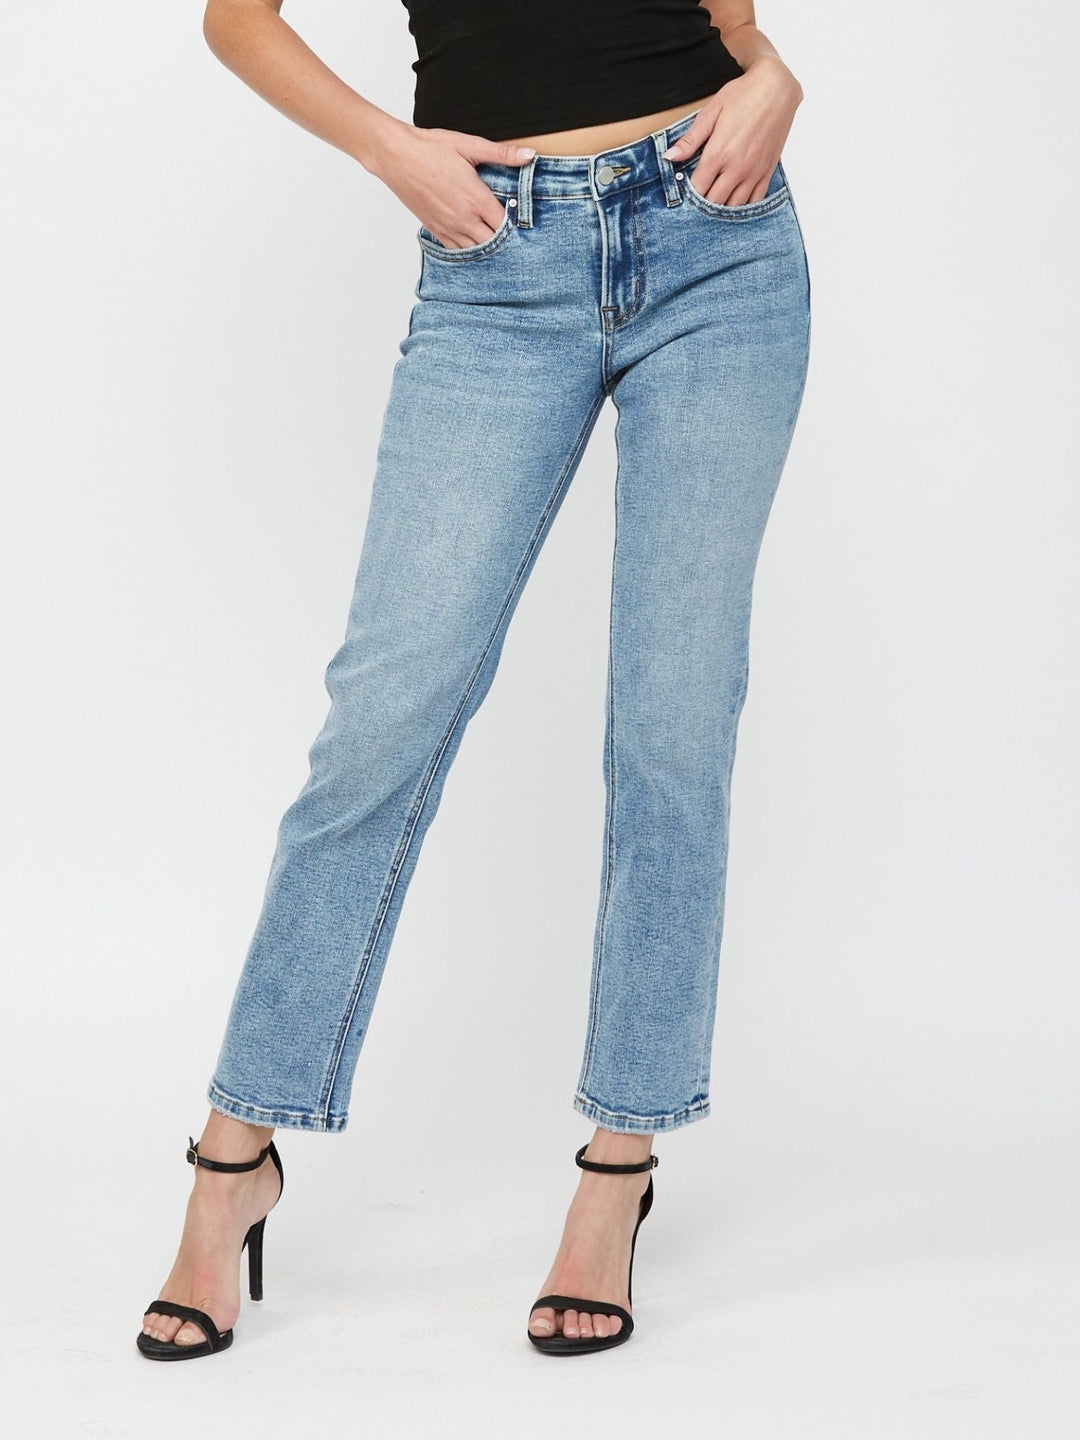 Mica High Rise Boot Cut Jeans for Women